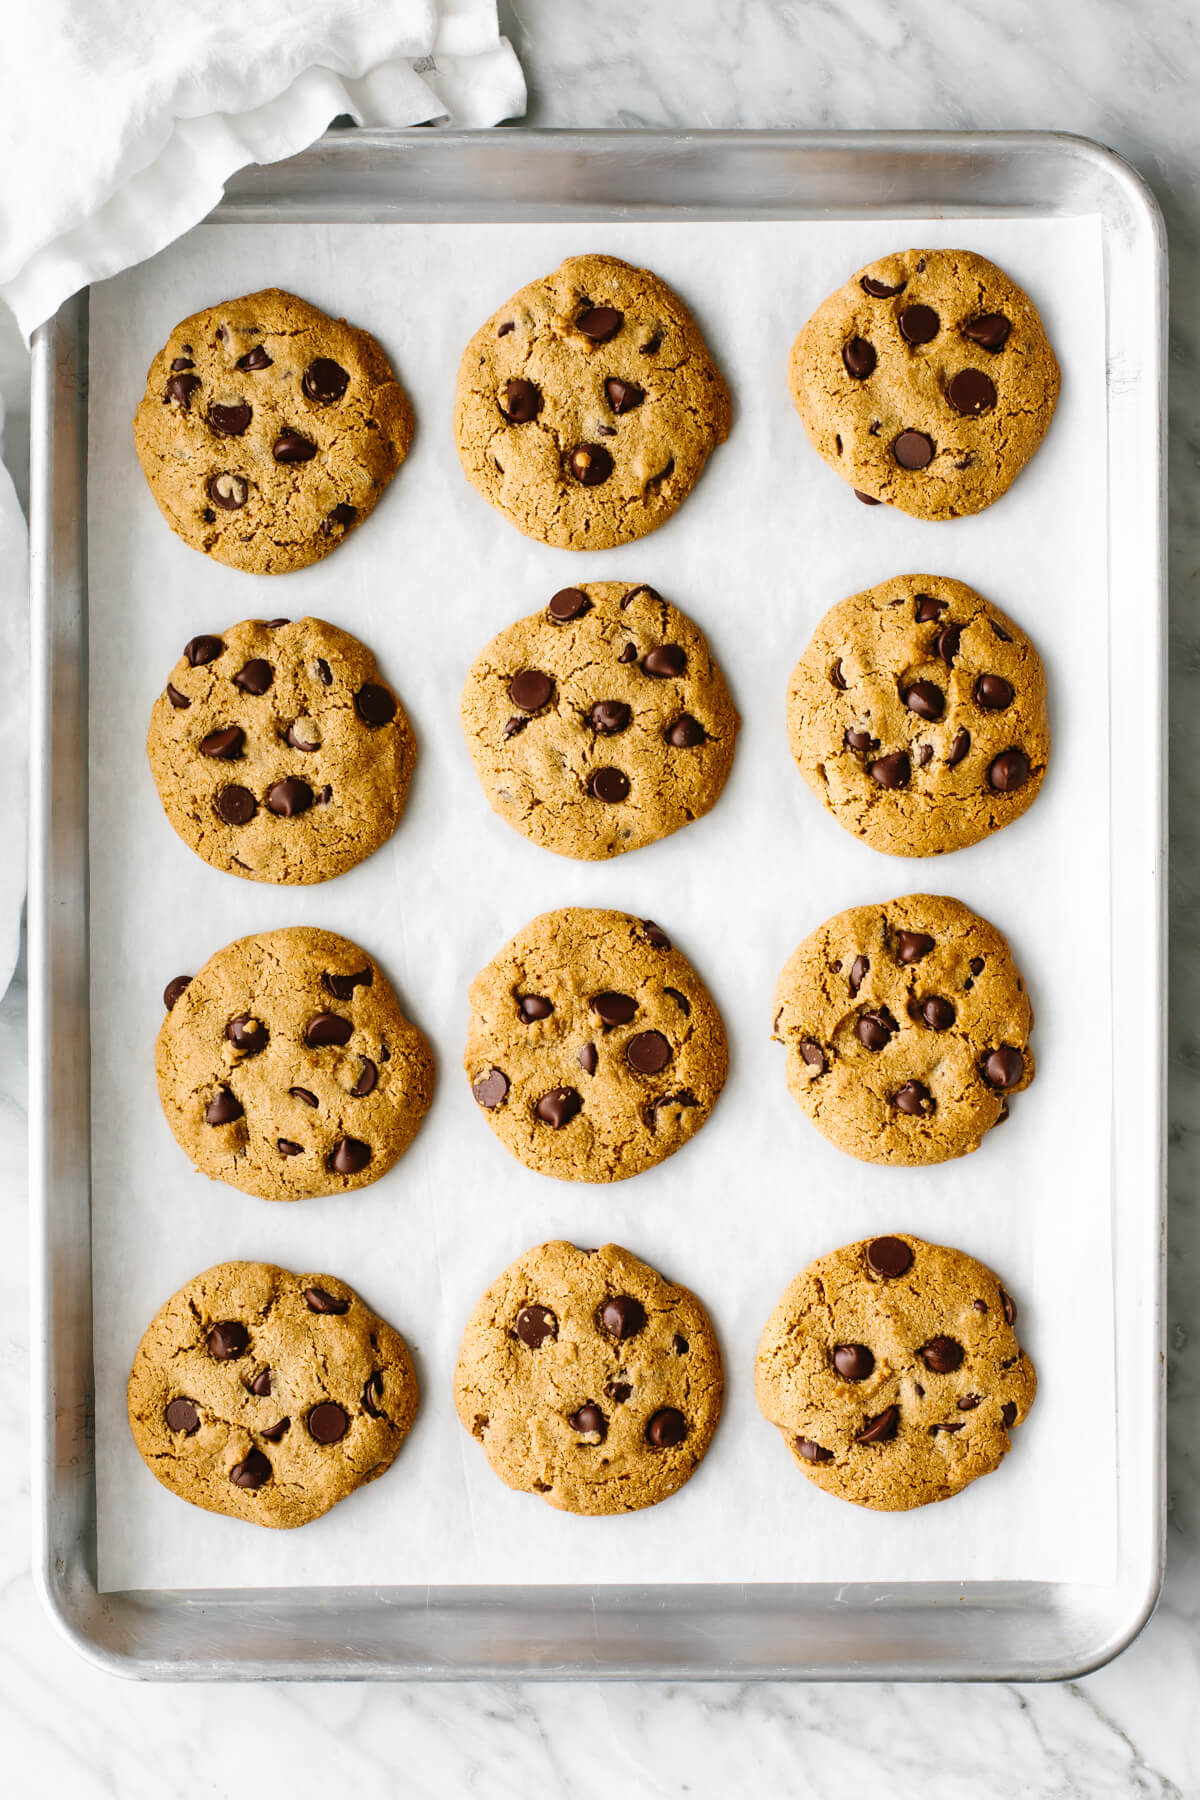 A metal sheet pan with gluten-free chocolate chip cookies lined up.